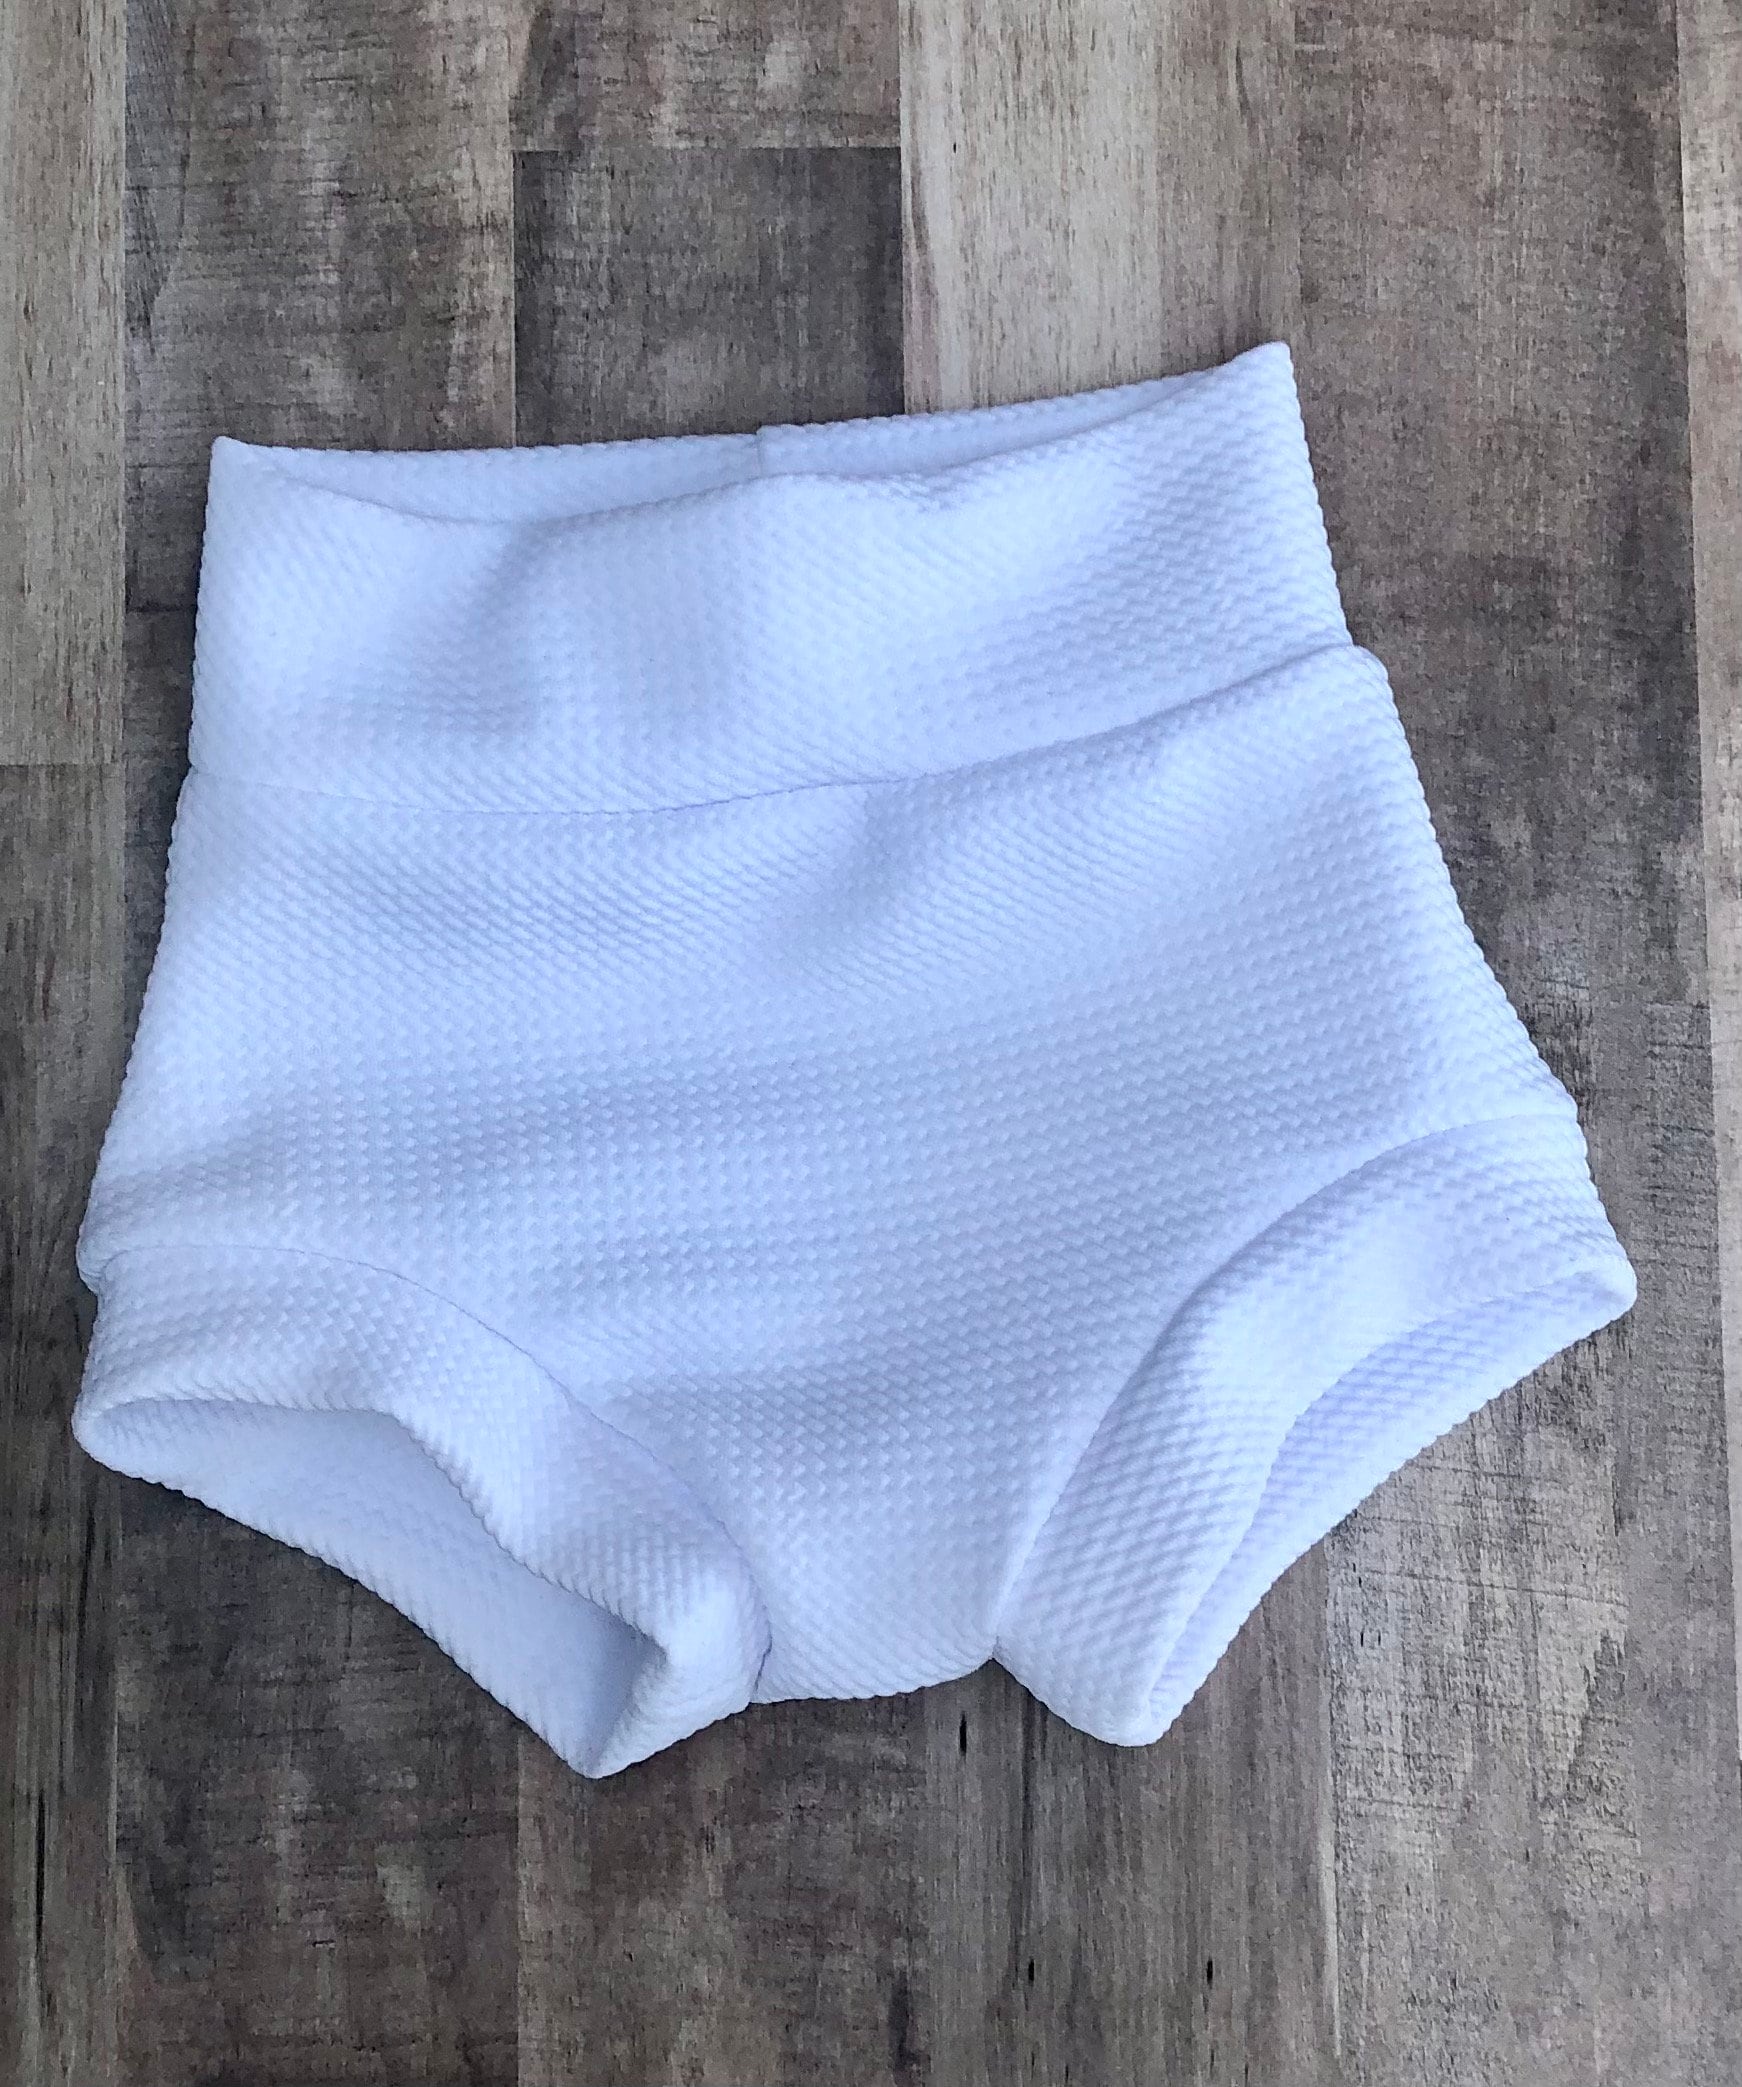 Weiße High Waisted Baby Bummie/White Bummies/Baby Shorties/Baby Girl Shorts/Baby Boy Shorts/Newborn Bummie/Windel Cover/Bloomers/Baby von cajunchiccreations